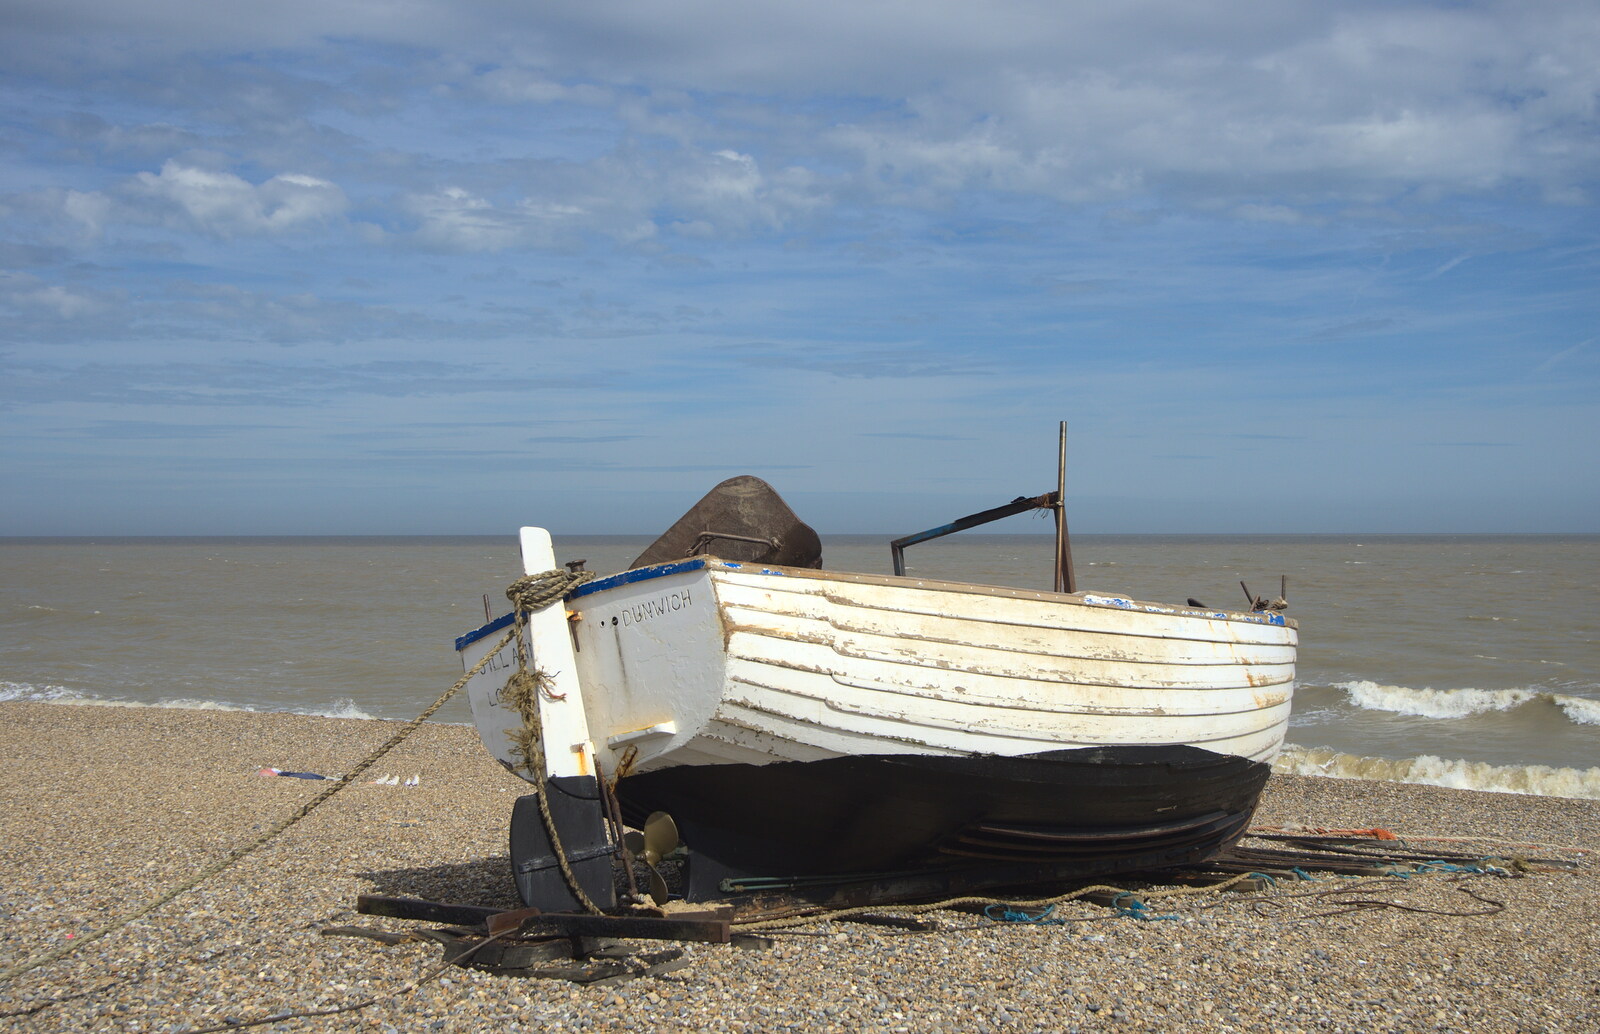 A fishing boat on Dunwich beach from Camping by the Seaside, Cliff House, Dunwich, Suffolk - 15th August 2012